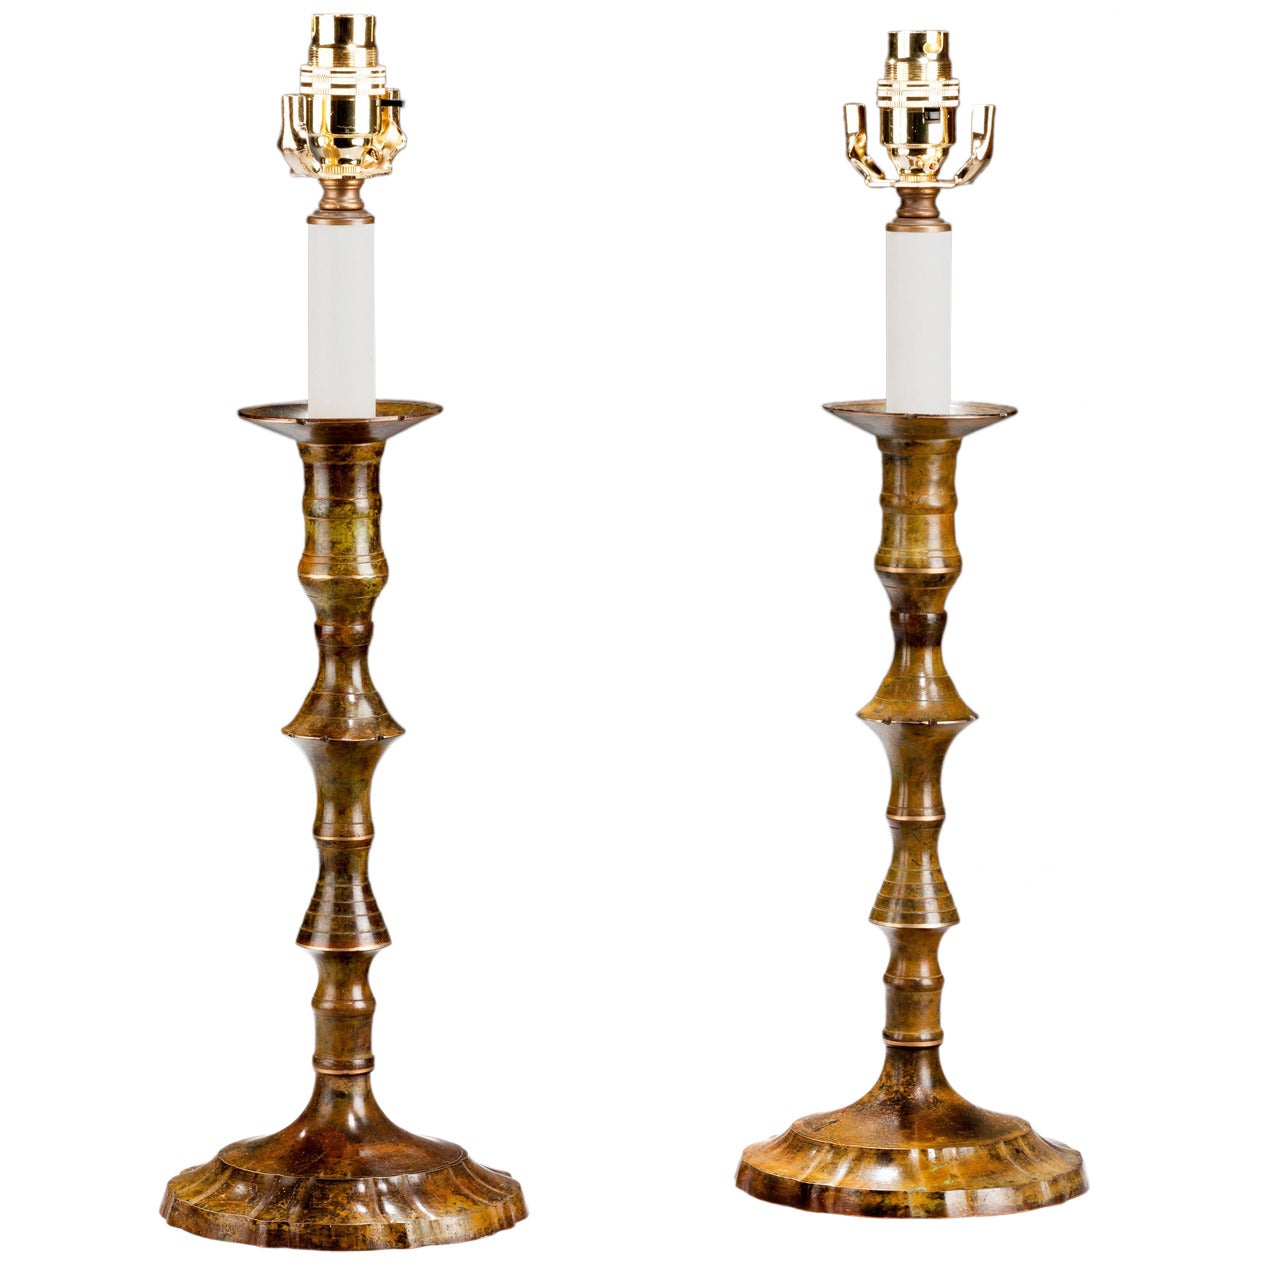 Pair of 'Antiqued' Brass Candlestick Lamps